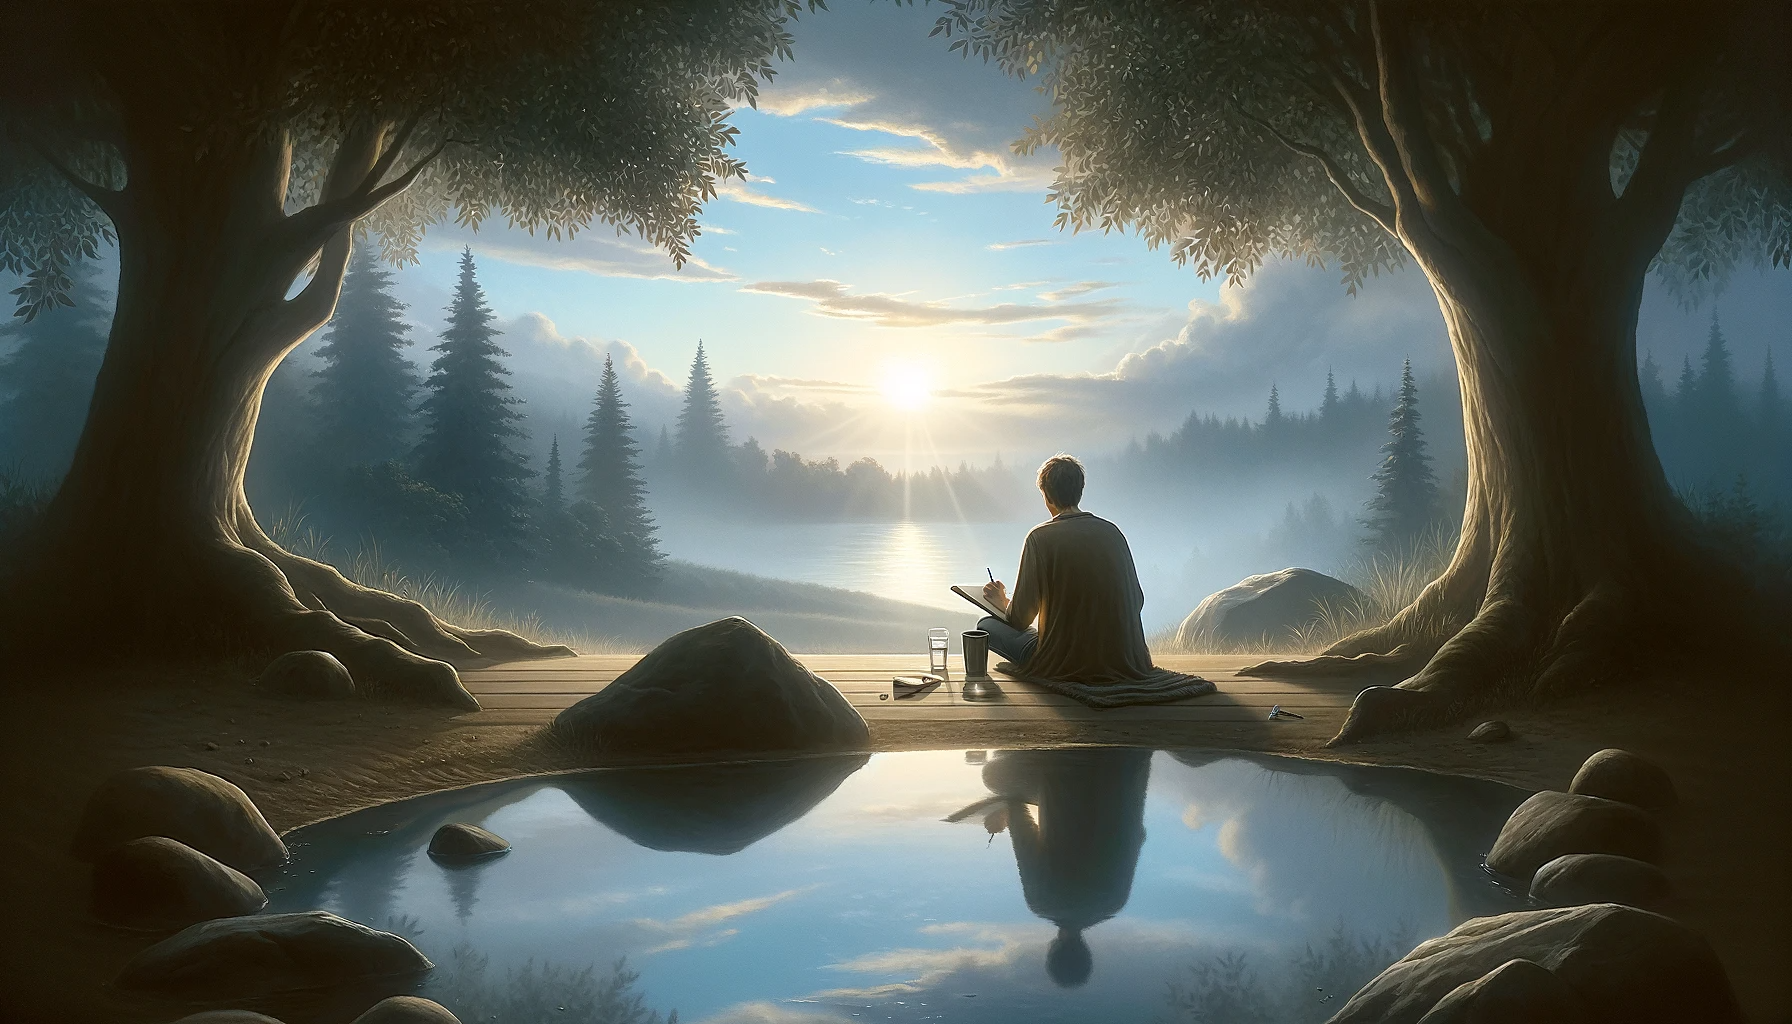 An image that represents the practice of a simple daily inventory in recovery. The scene should depict a serene and introspective setting, possibly sh